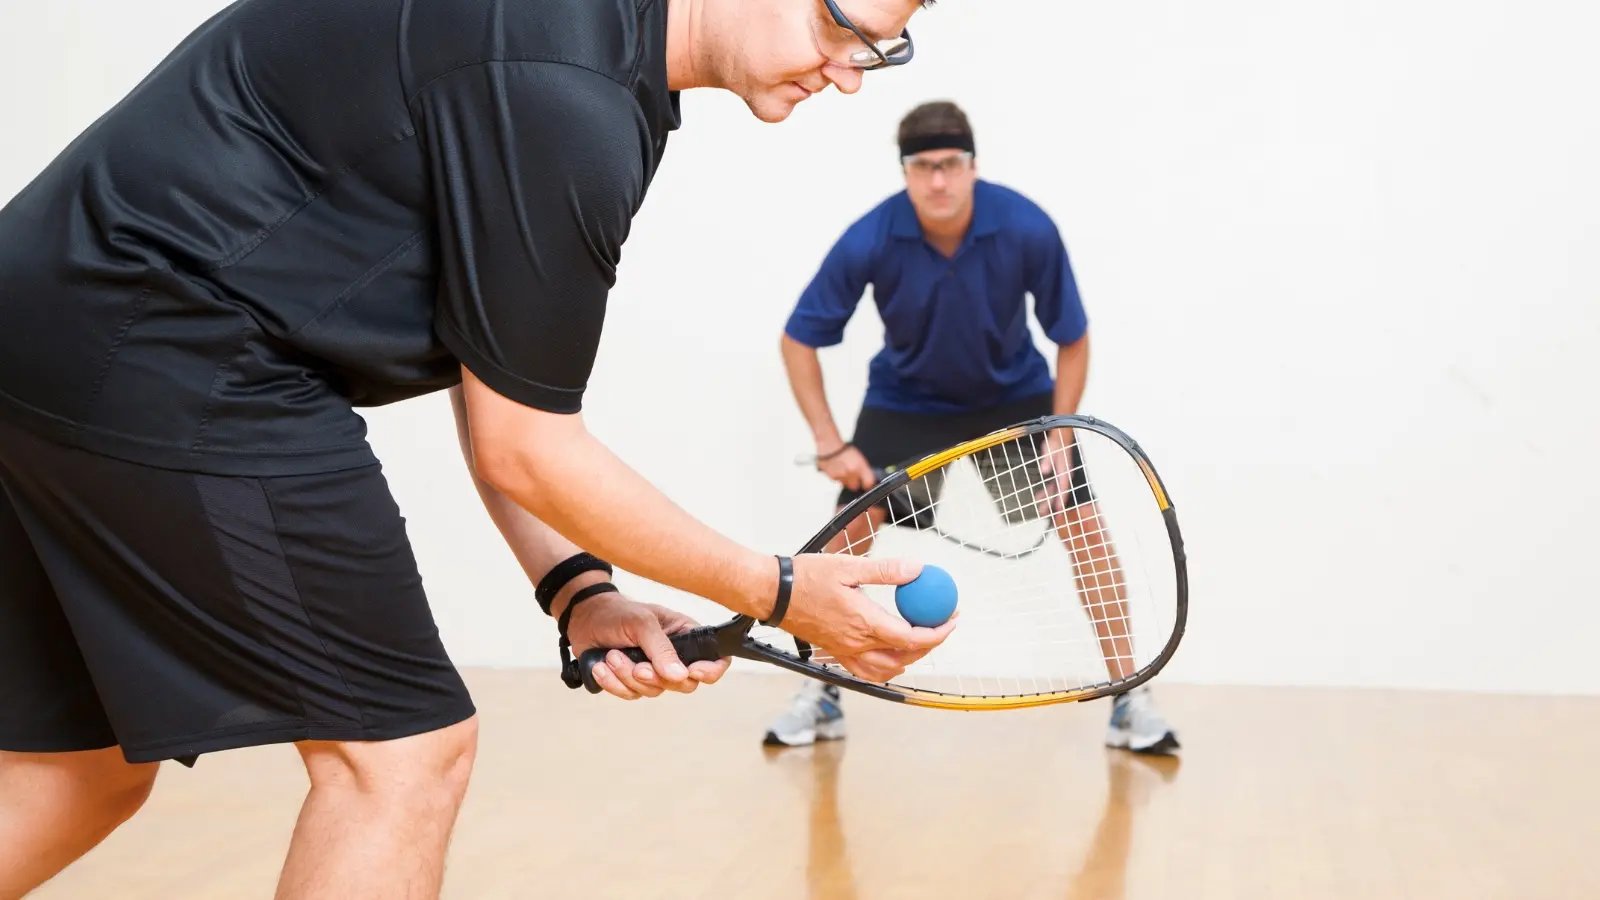 Improves cardiovascular health - Playing Racquetball